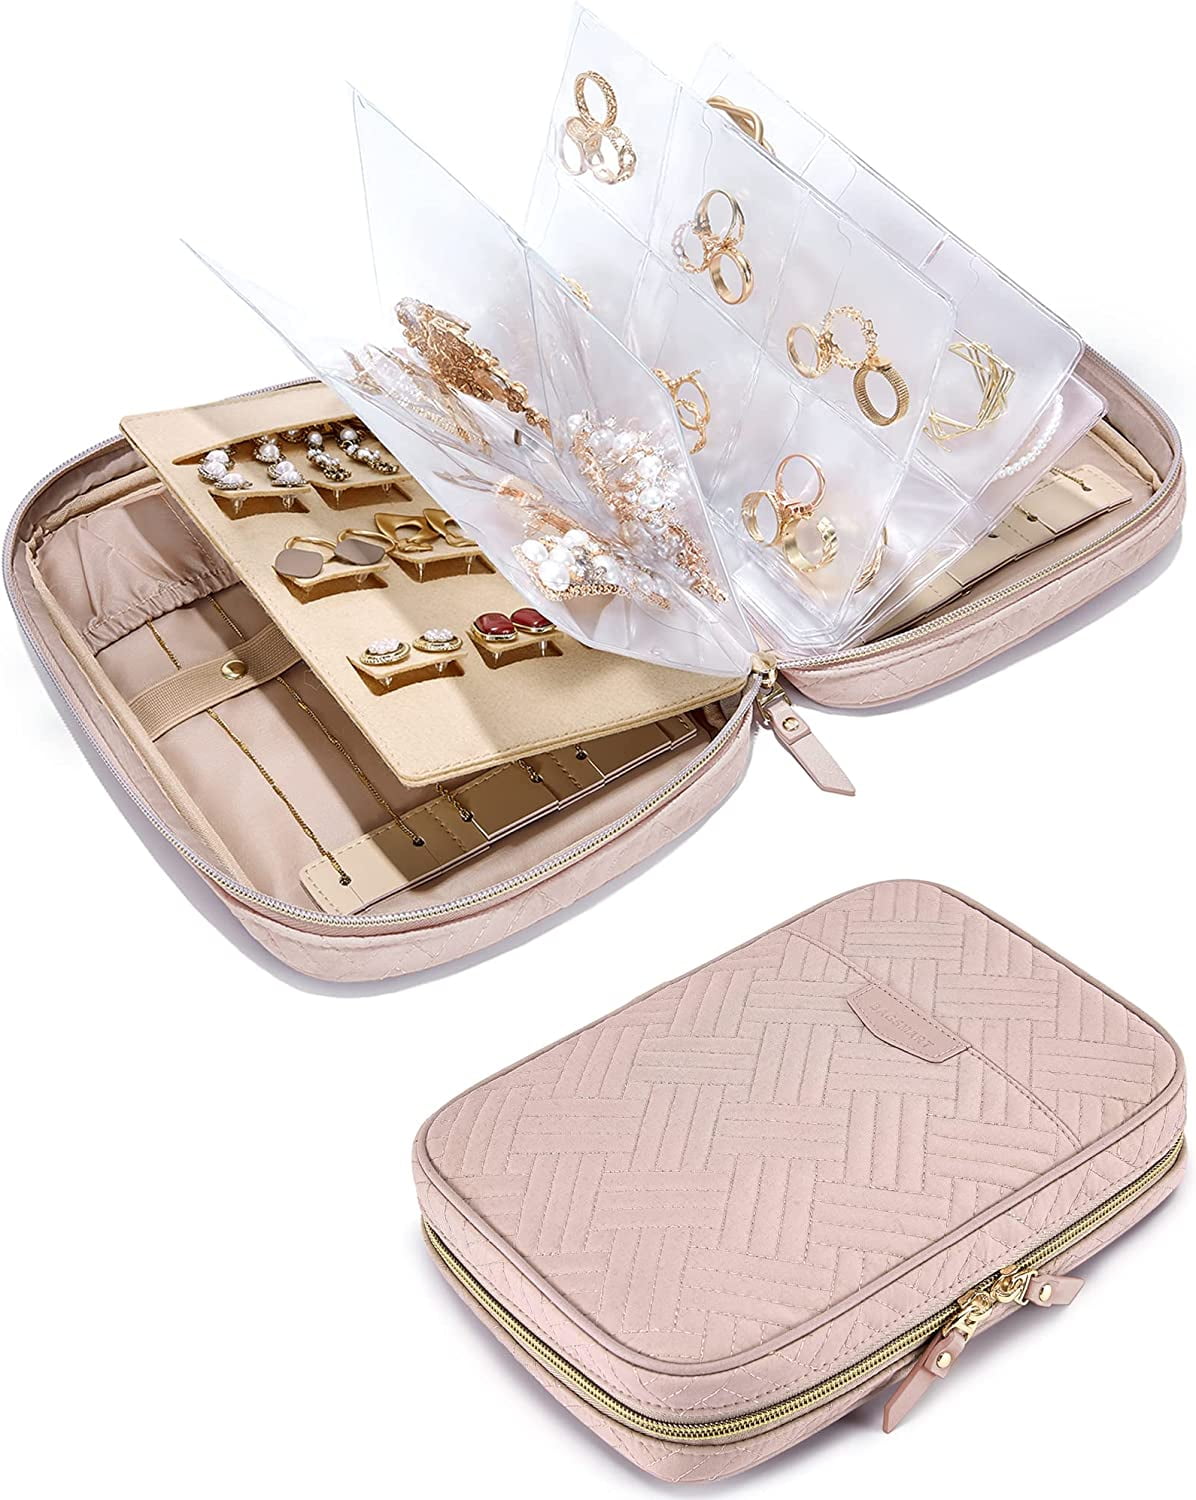 Clear Jewelry Bag with Hanging Tab - Jewelry Packaging [J4]